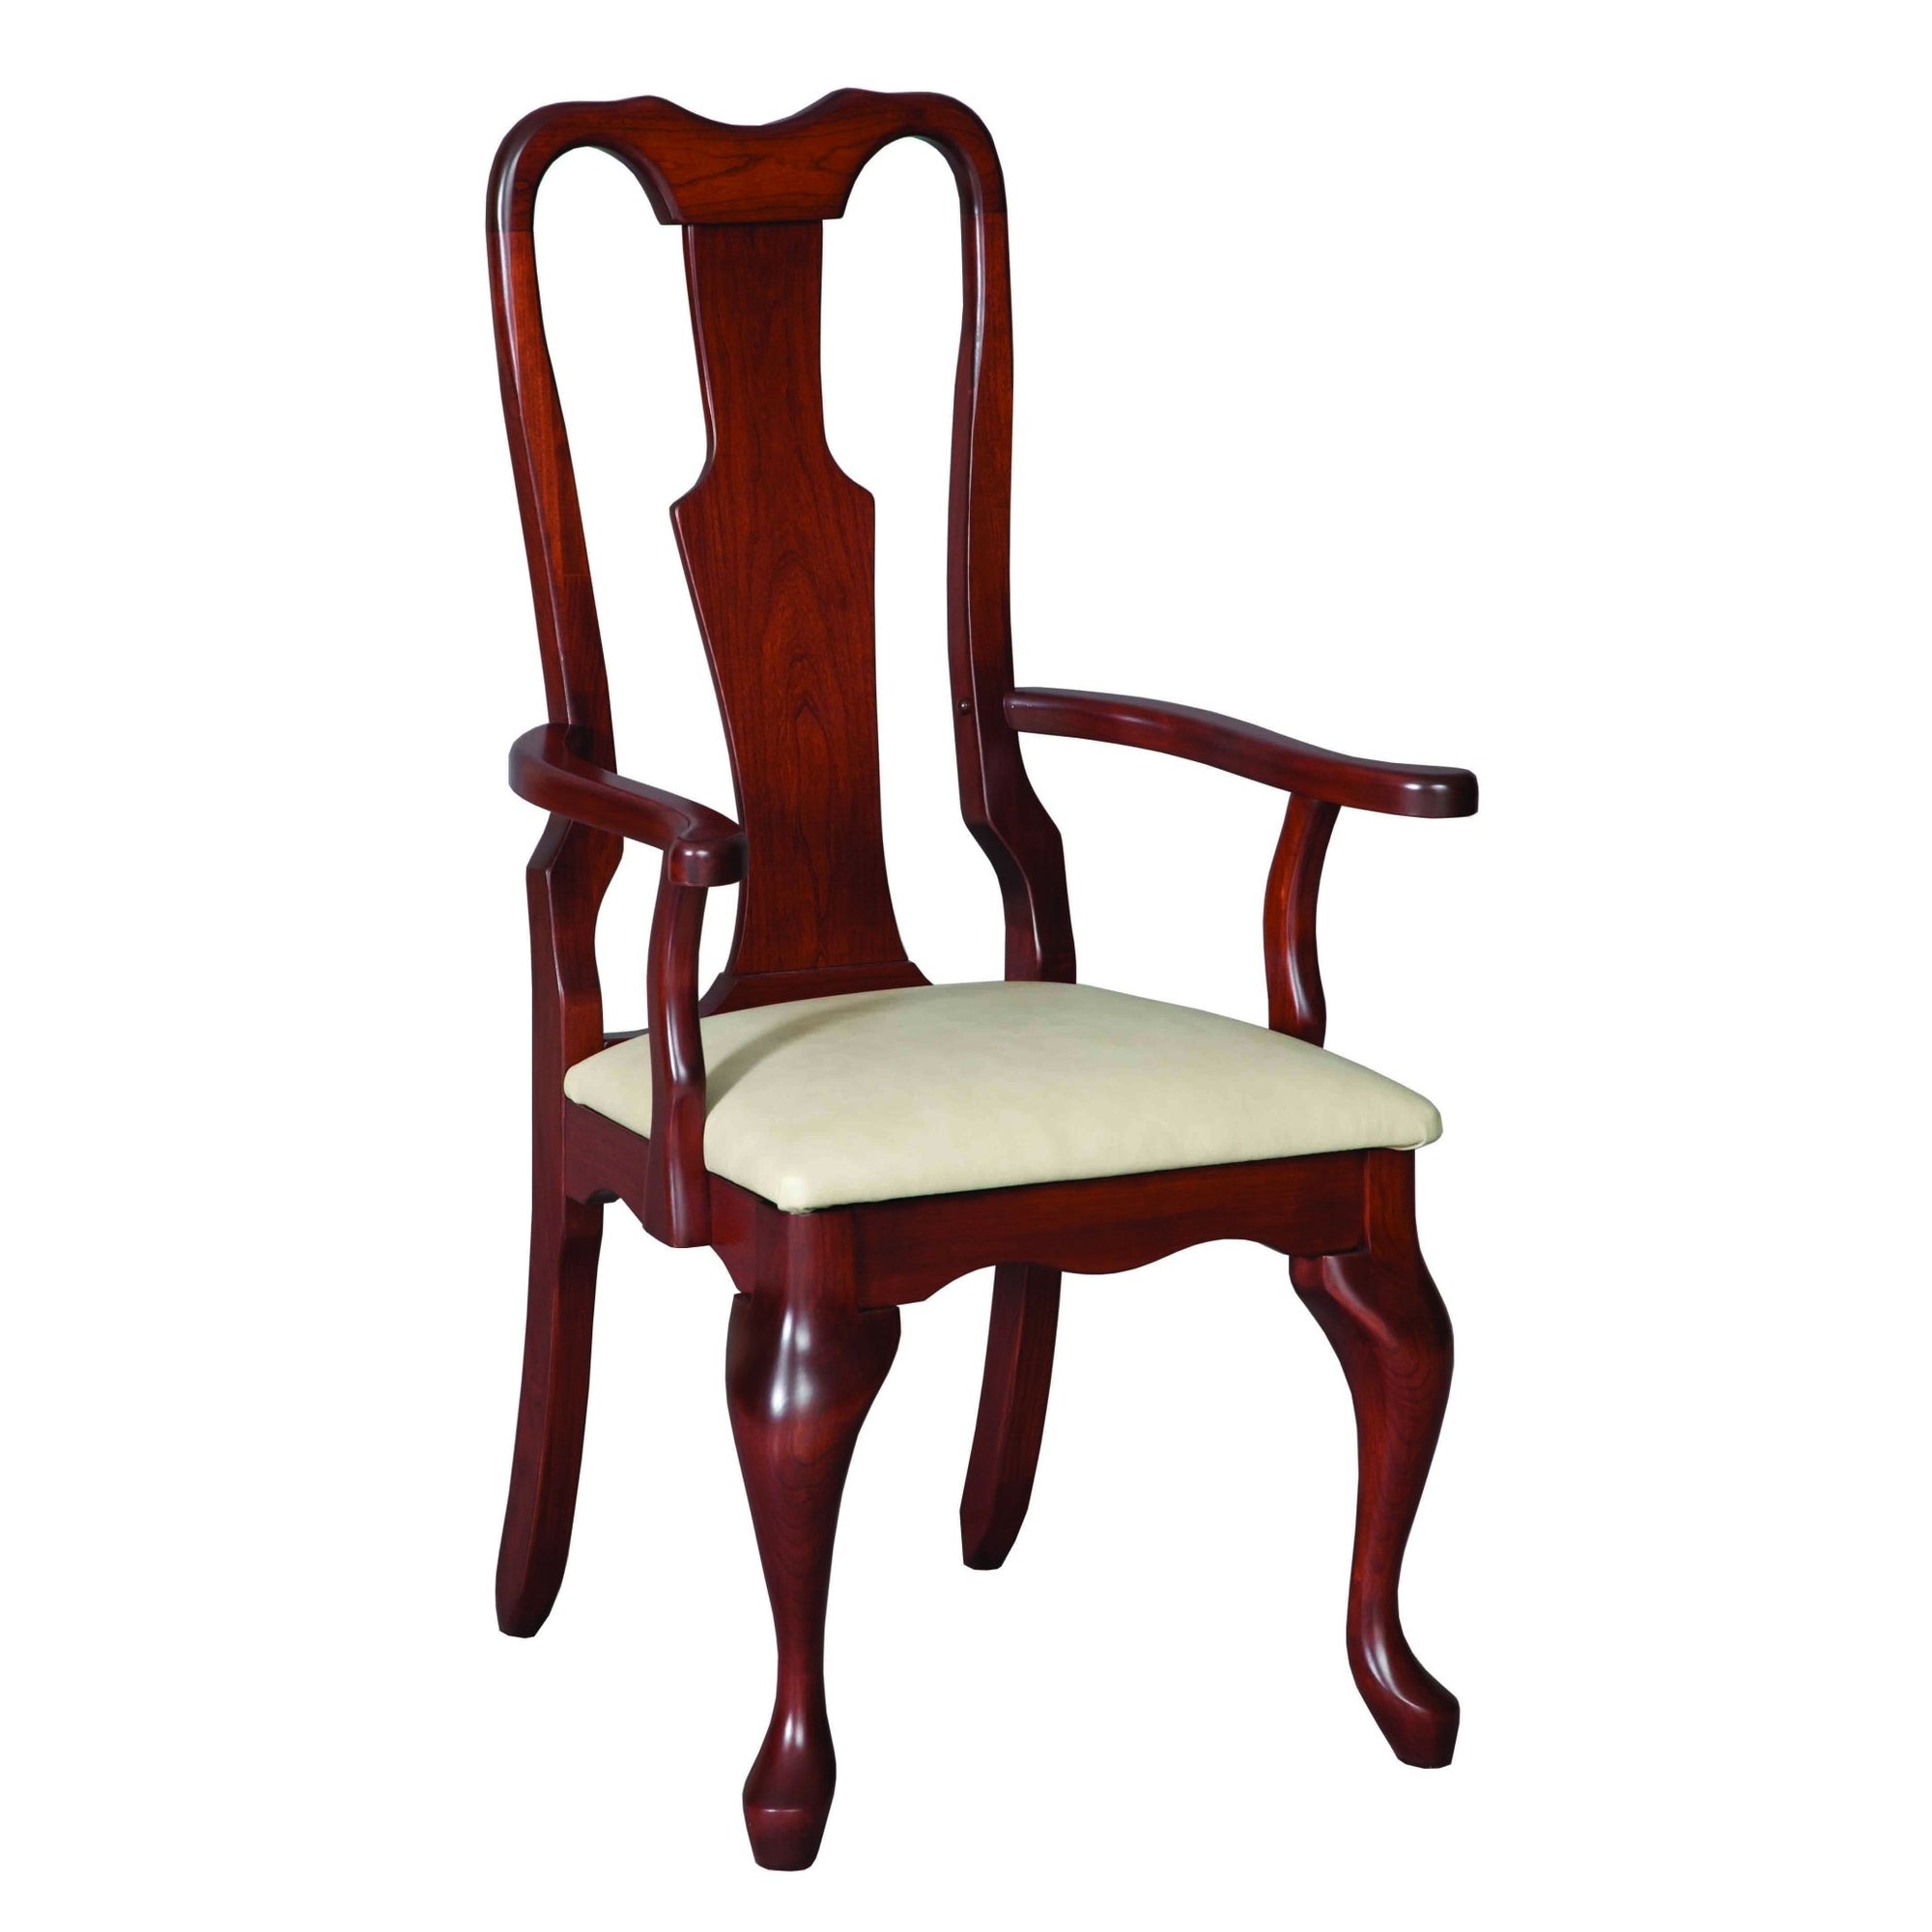 Queen Anne Chair - snyders.furniture